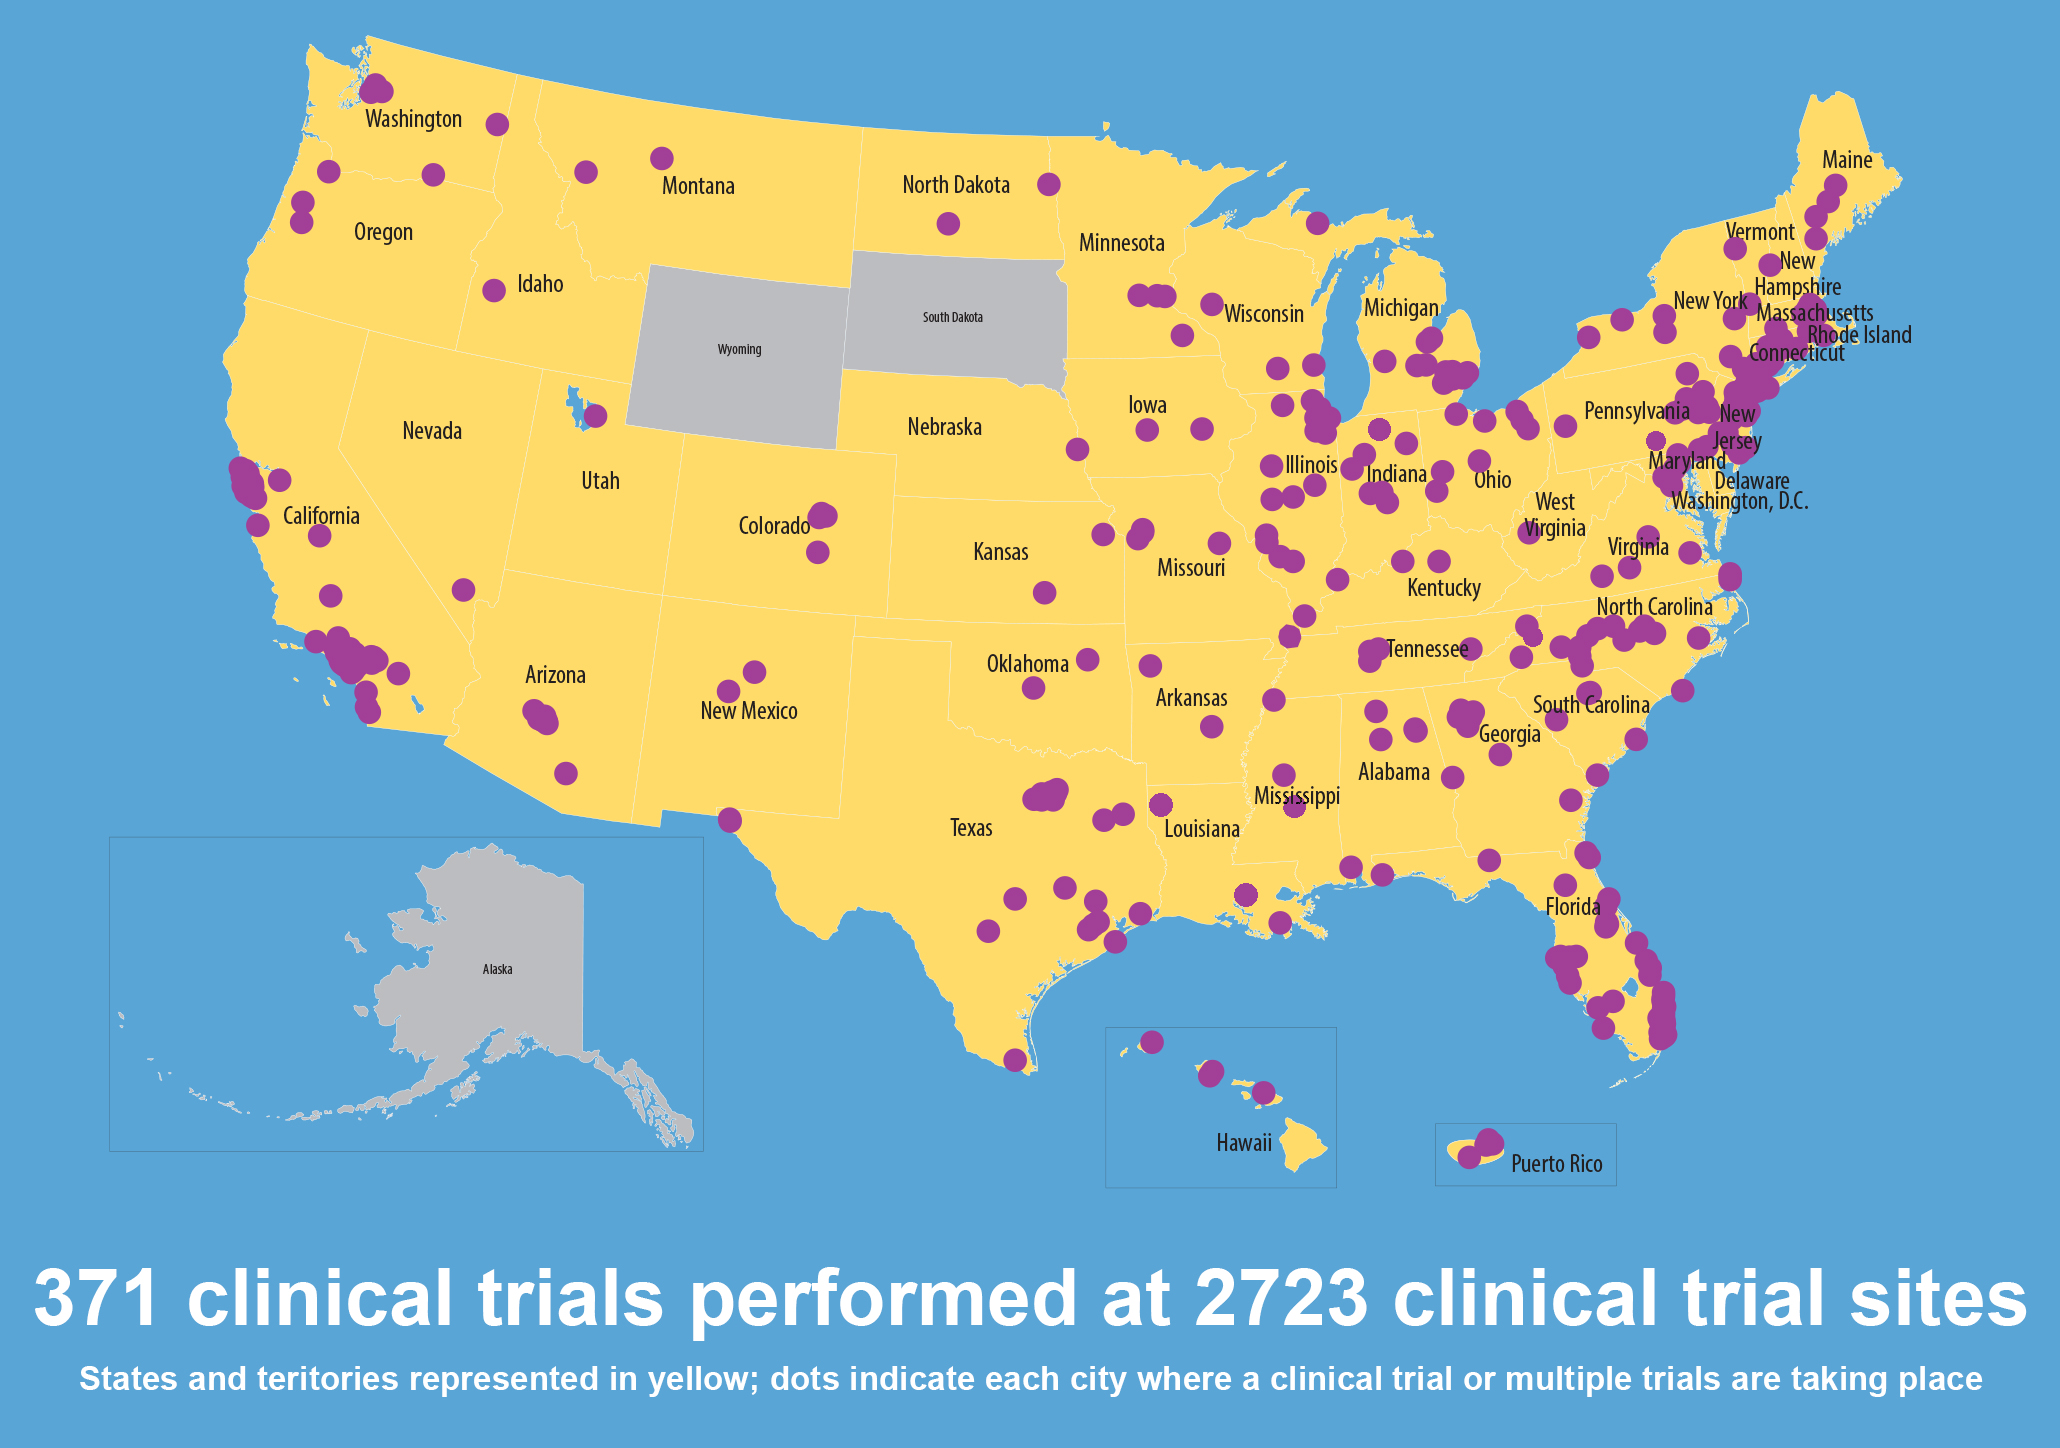 US clinical trial sites